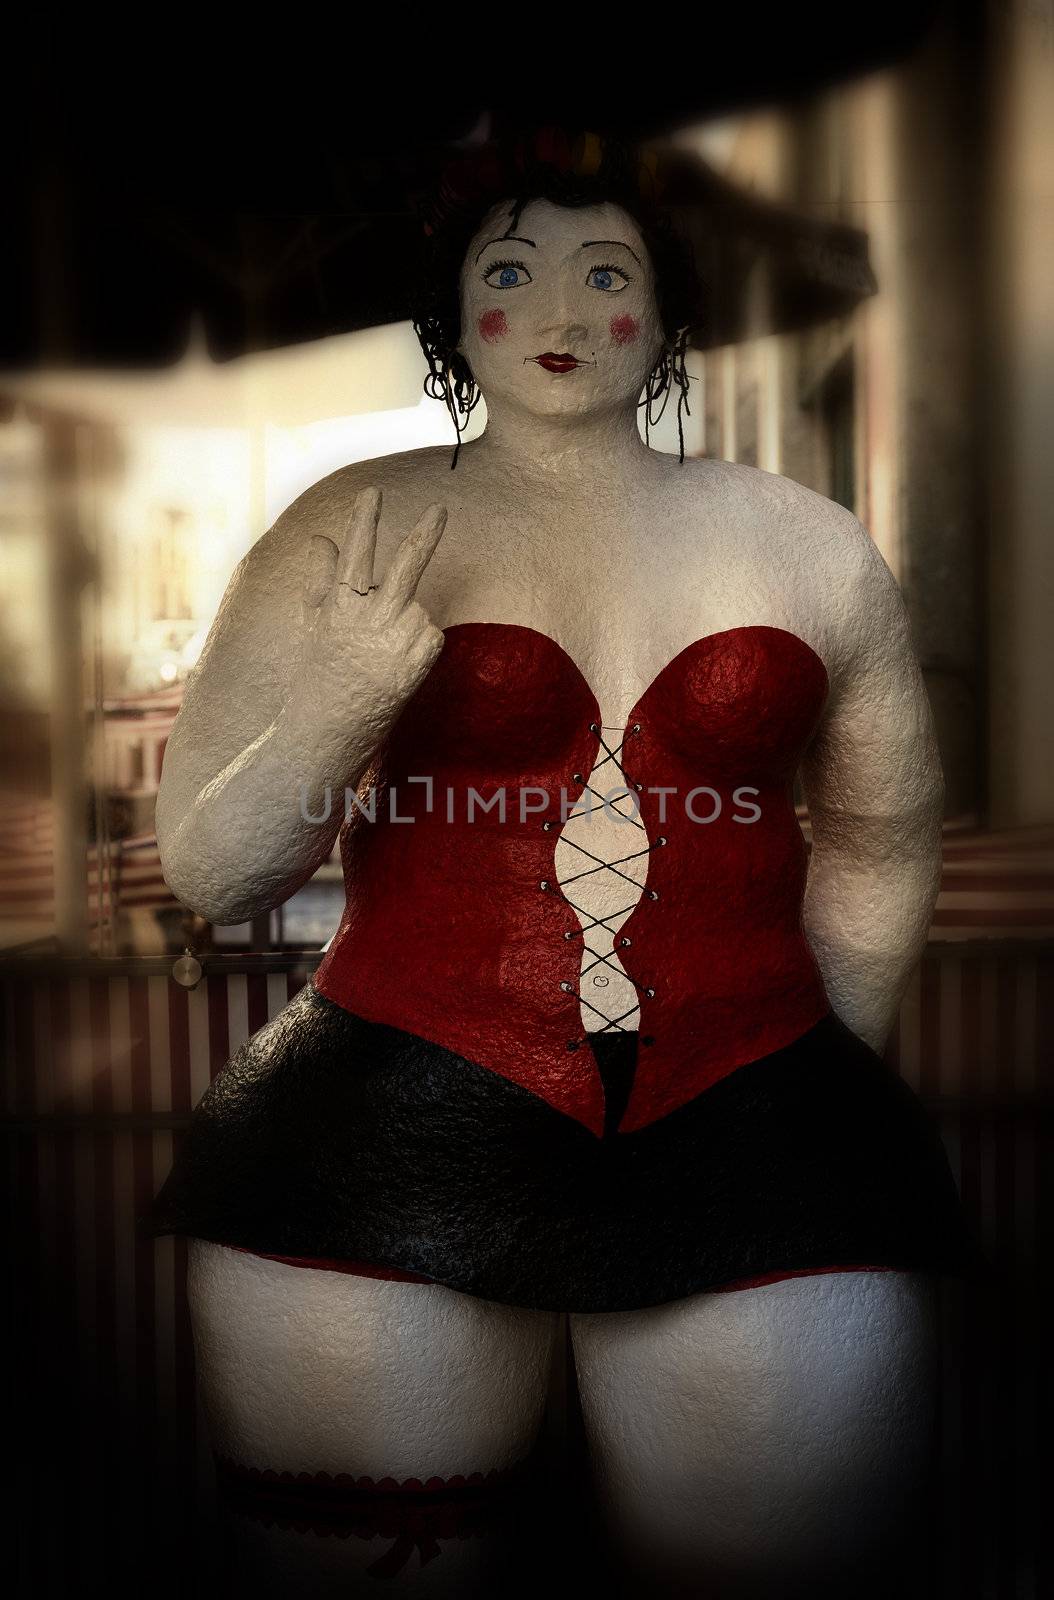 Antique well-nourished sexy female doll outside Portuguese restaurant.